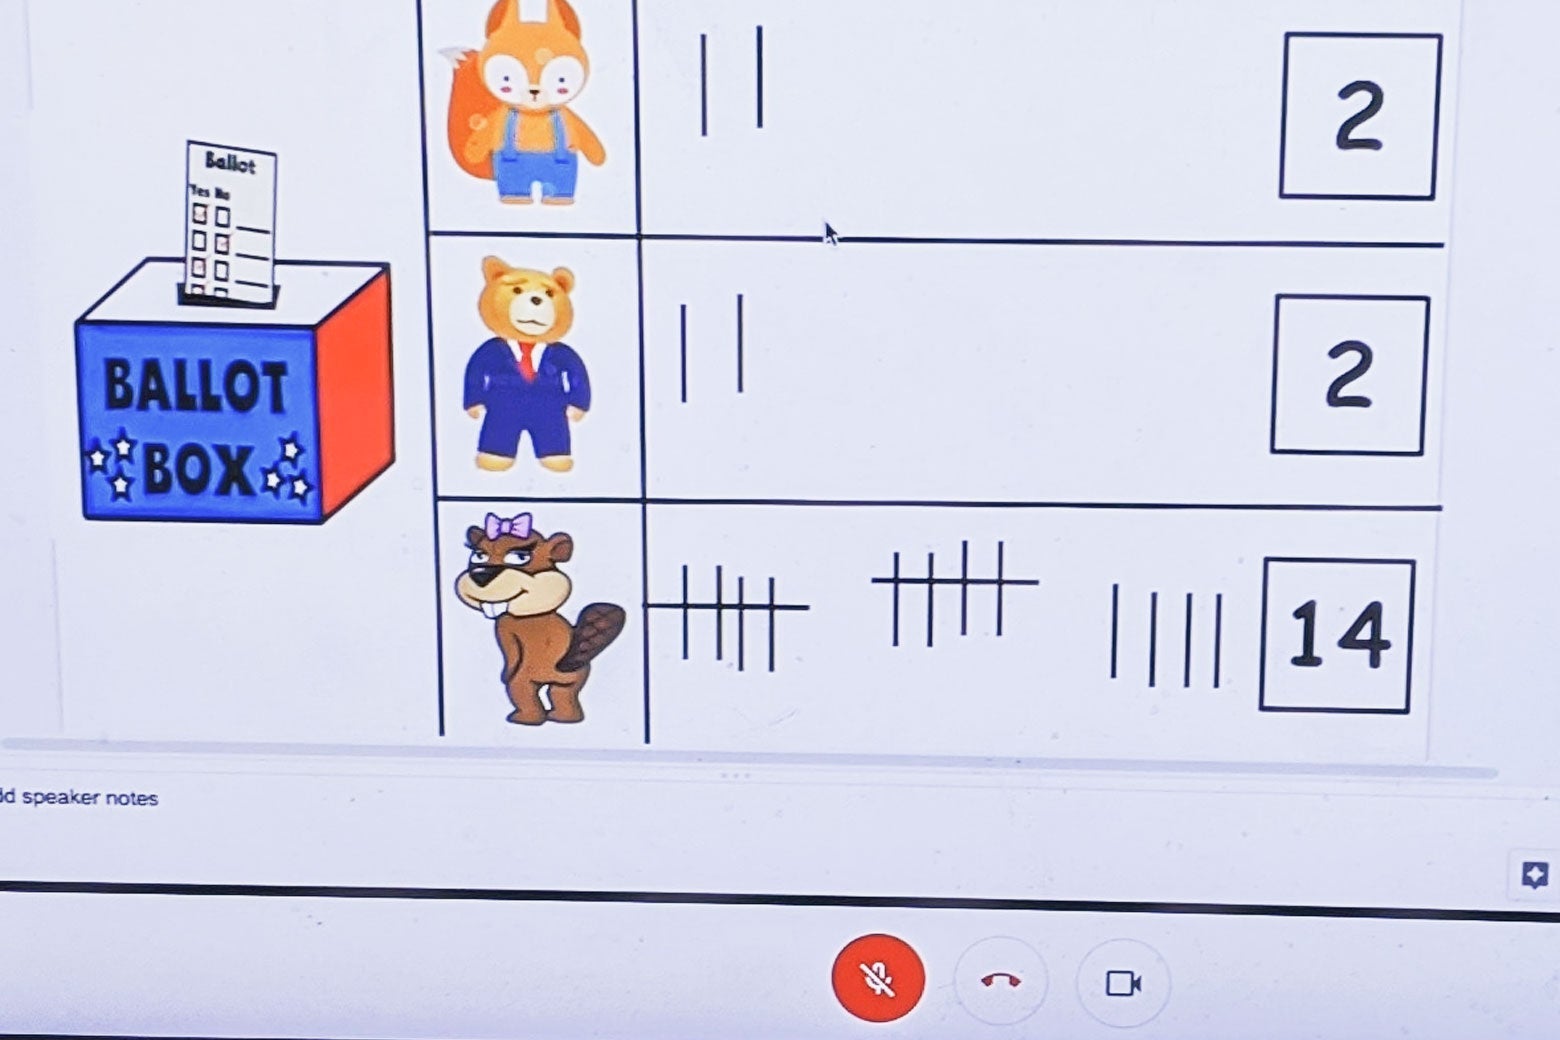 Screenshot of a virtual learning interface showing 14 tallied votes for the beaver and 2 each for the fox and bear